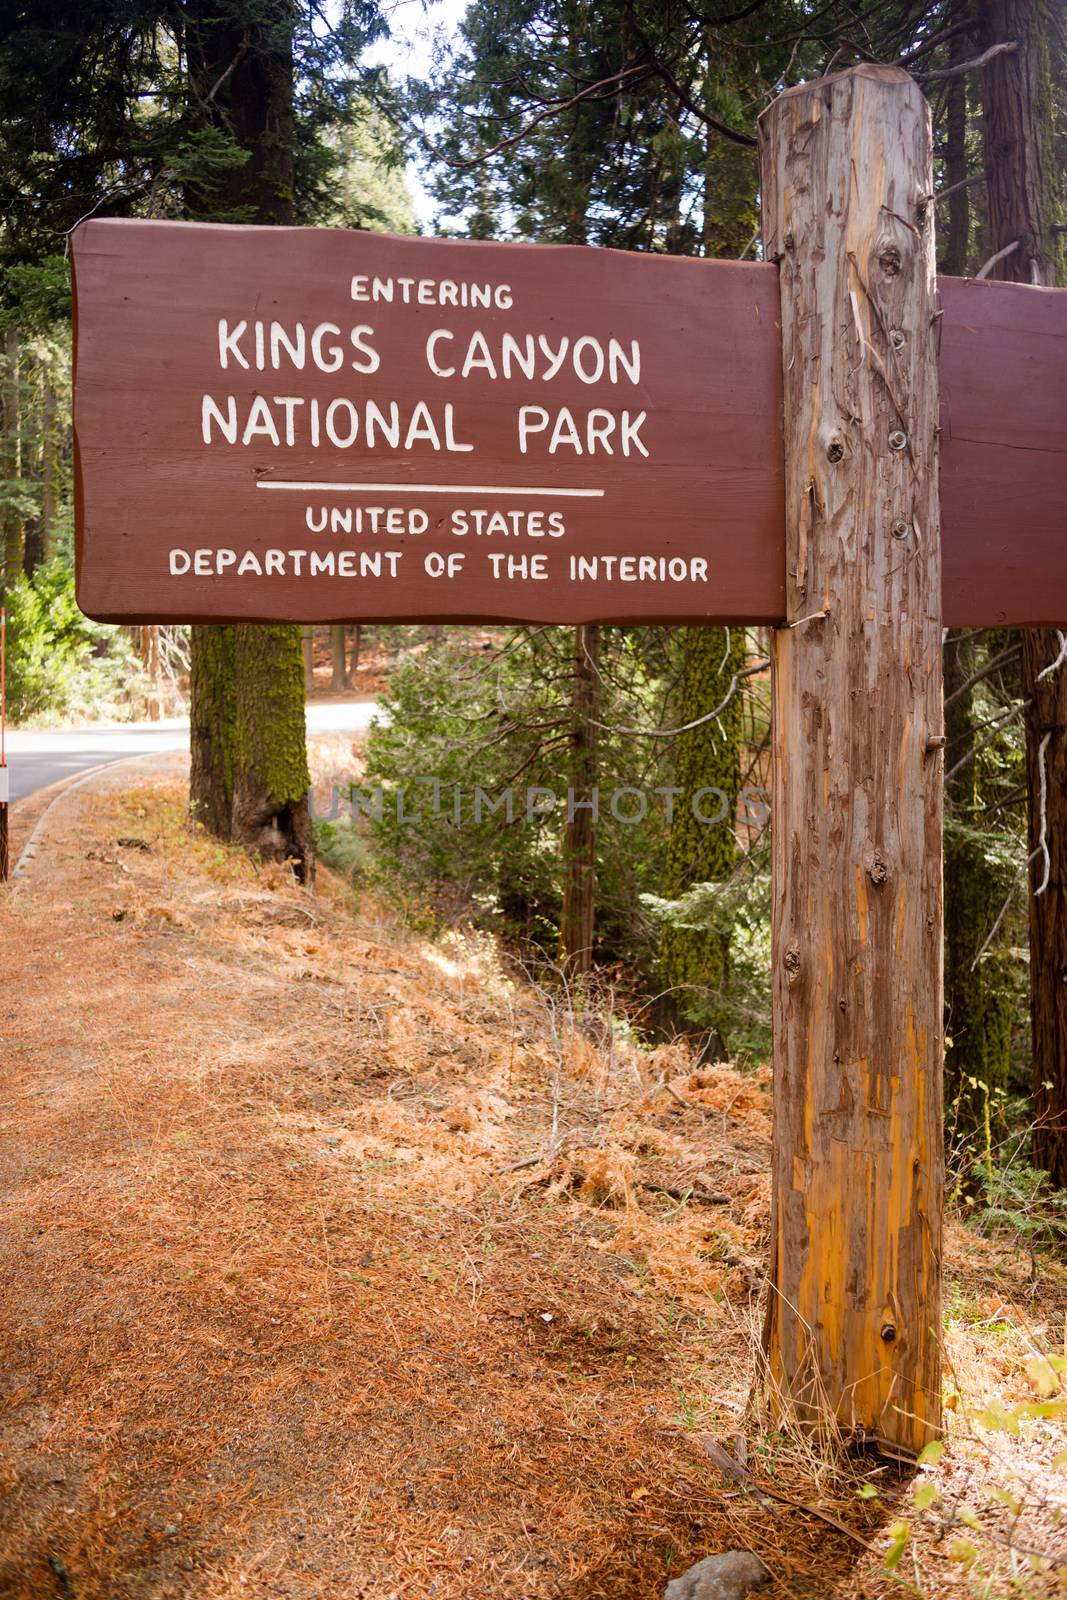 Kings Canyon National Park Entrance Sign US Interior Department by ChrisBoswell